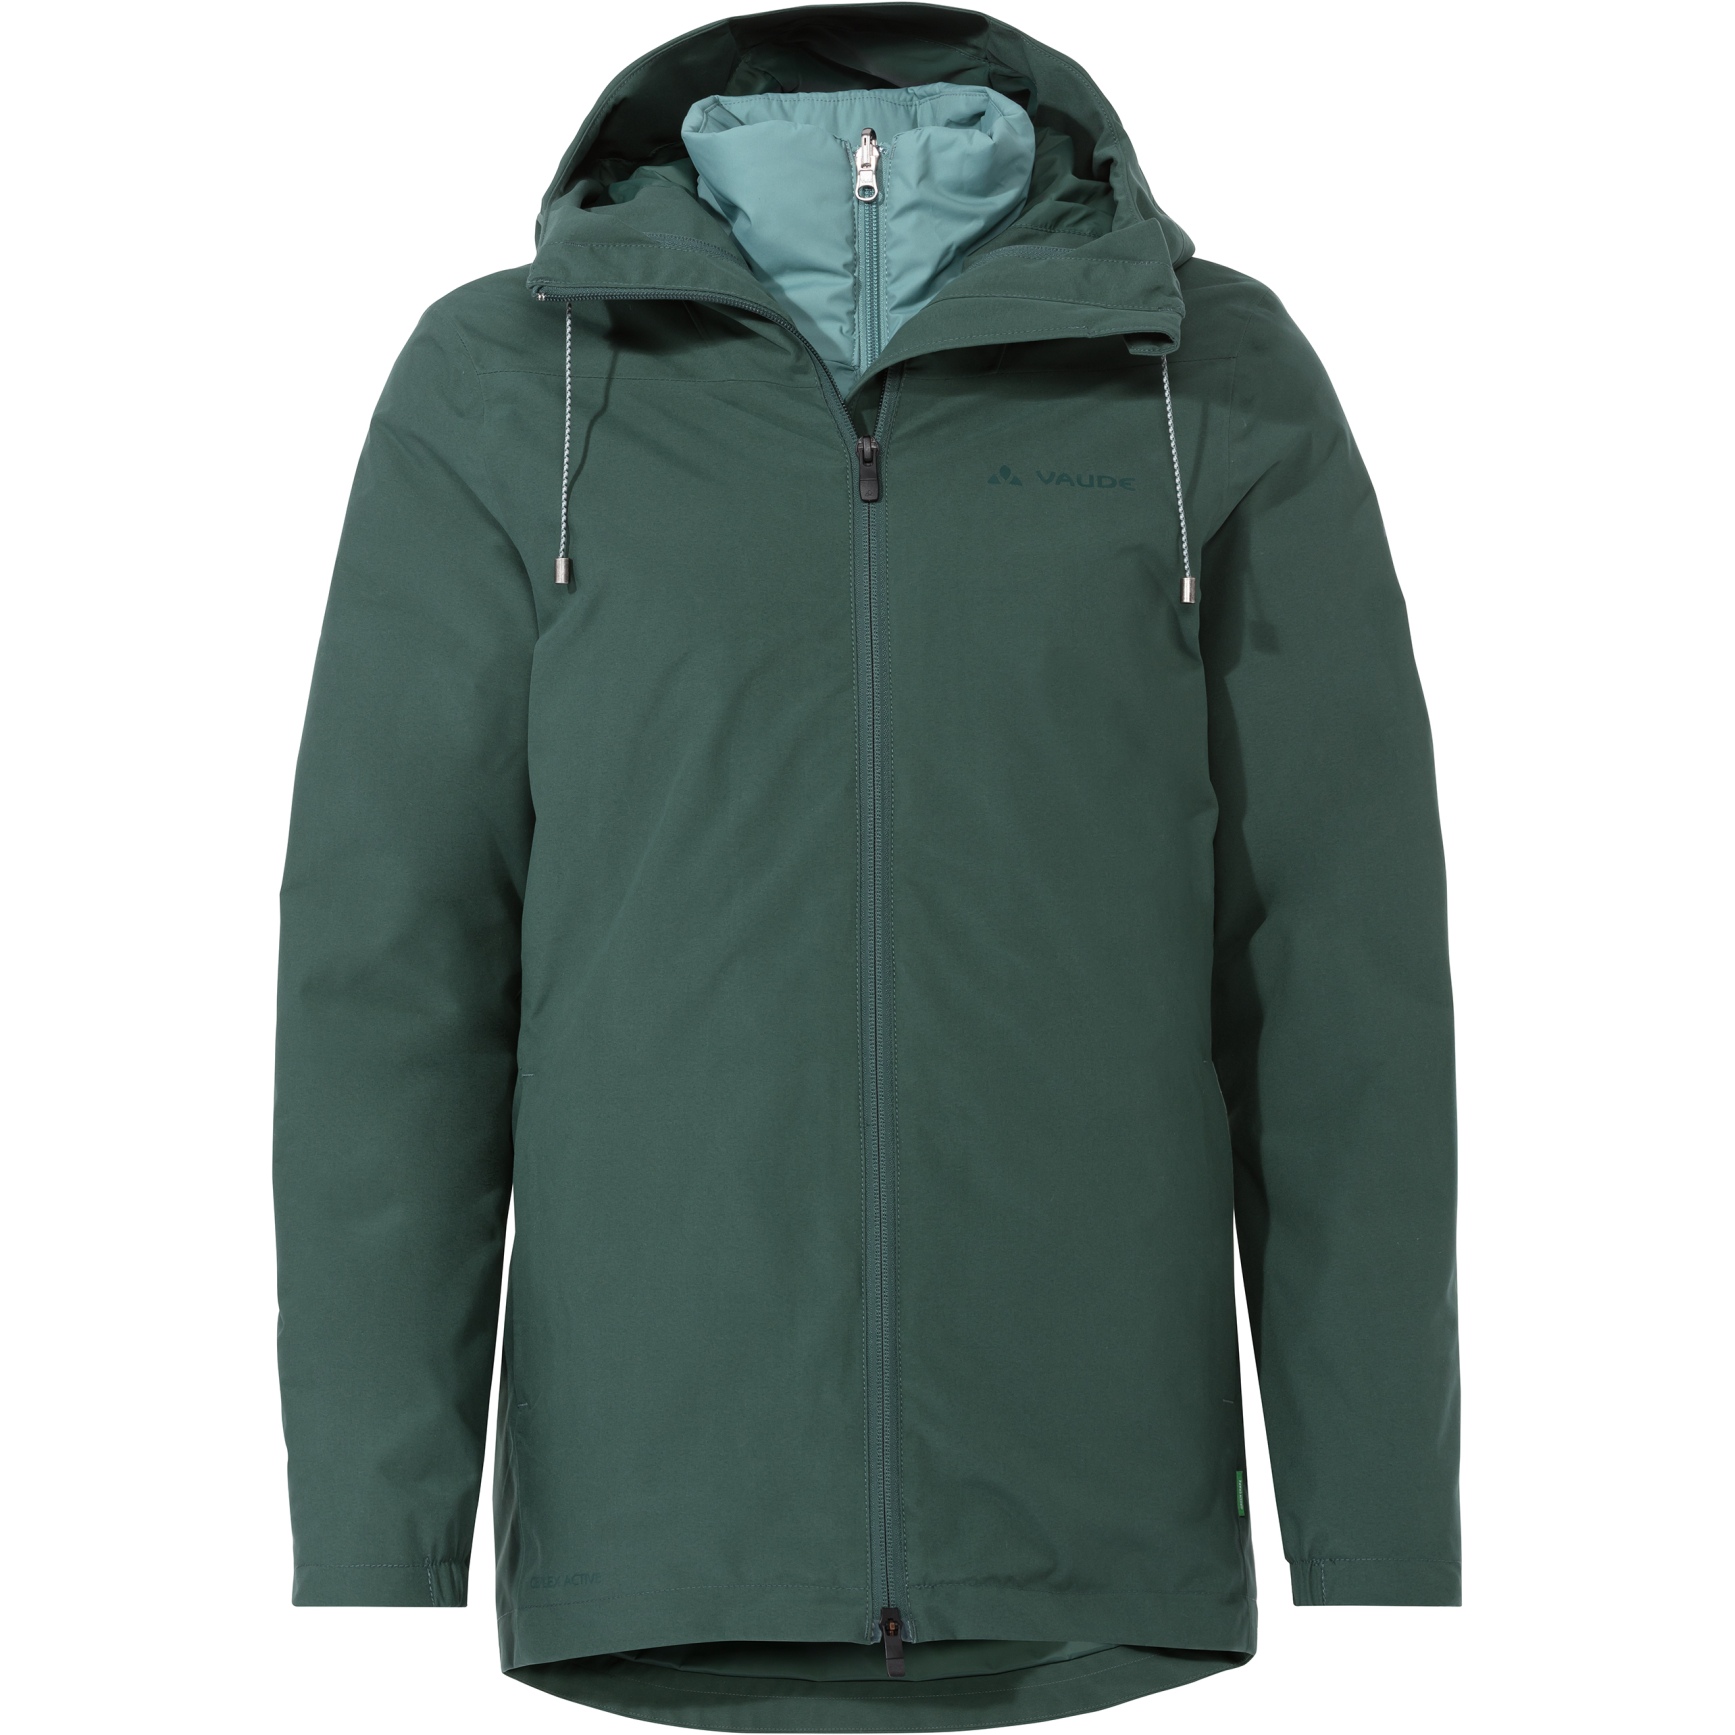 Image of Vaude Women's Mineo 3in1 Jacket - dusty forest